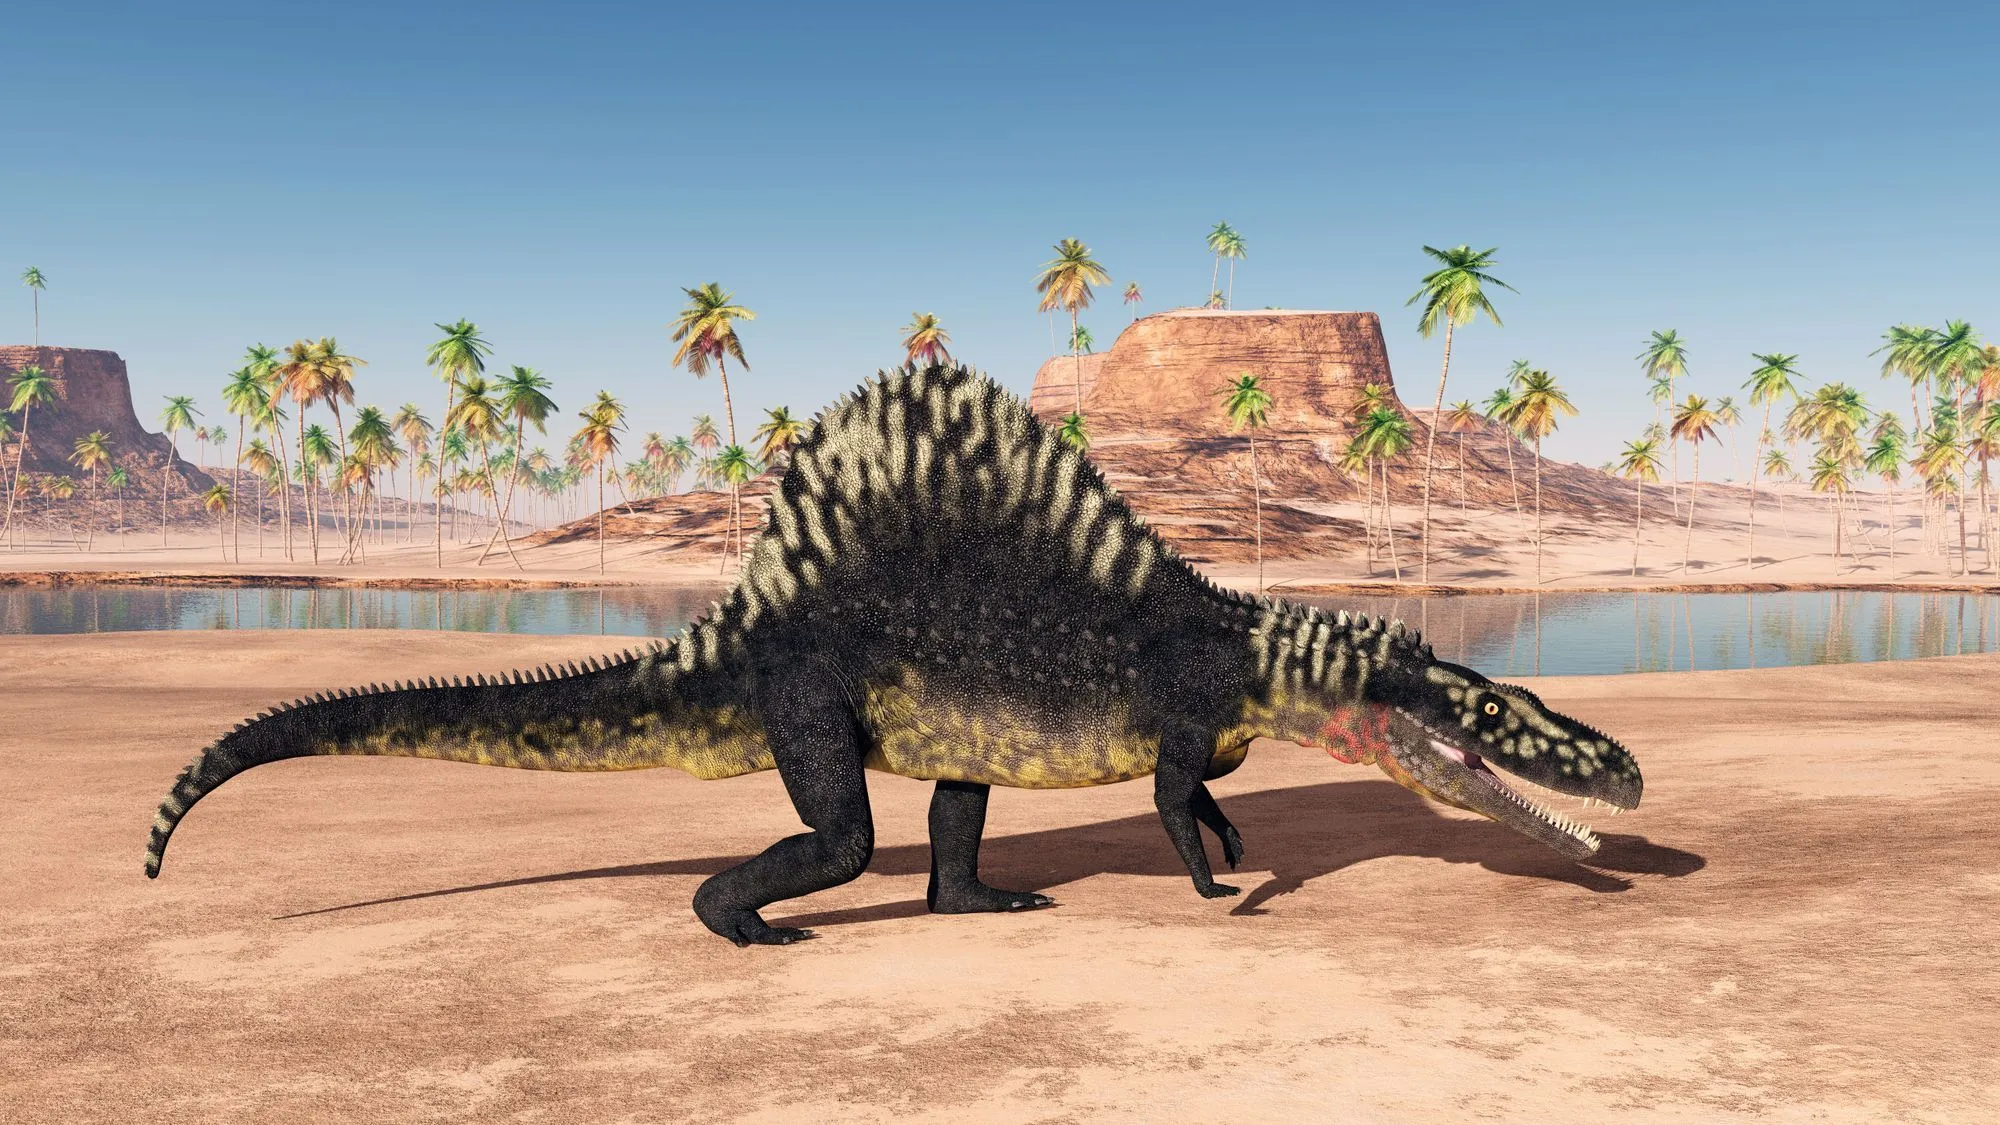 Discover these fascinating Arizonasaurus facts!